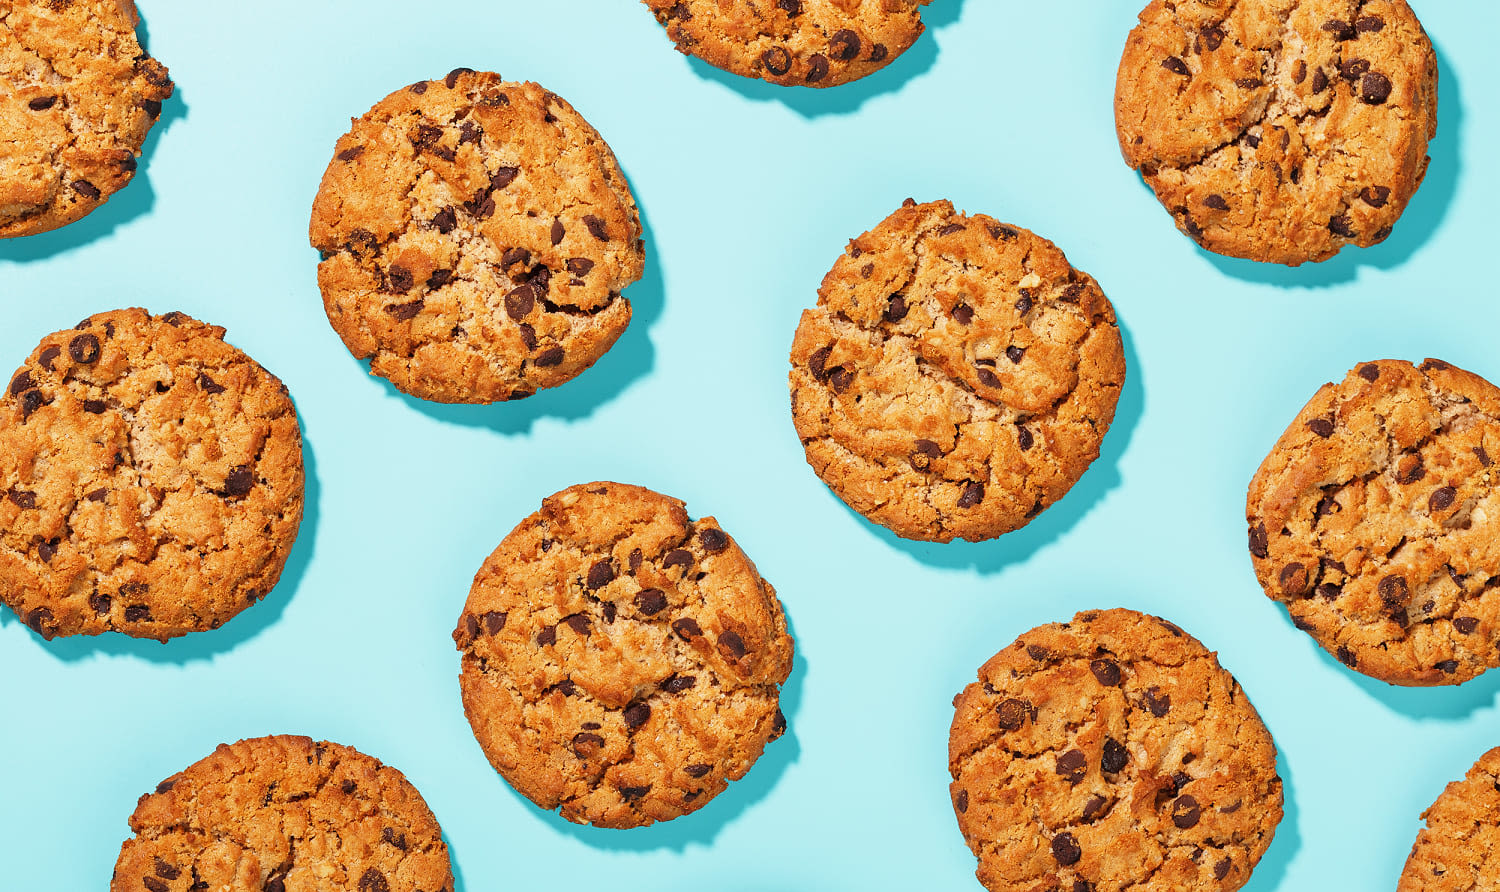 16 National Chocolate Chip Cookie Day deals to save you a sweet chunk of change